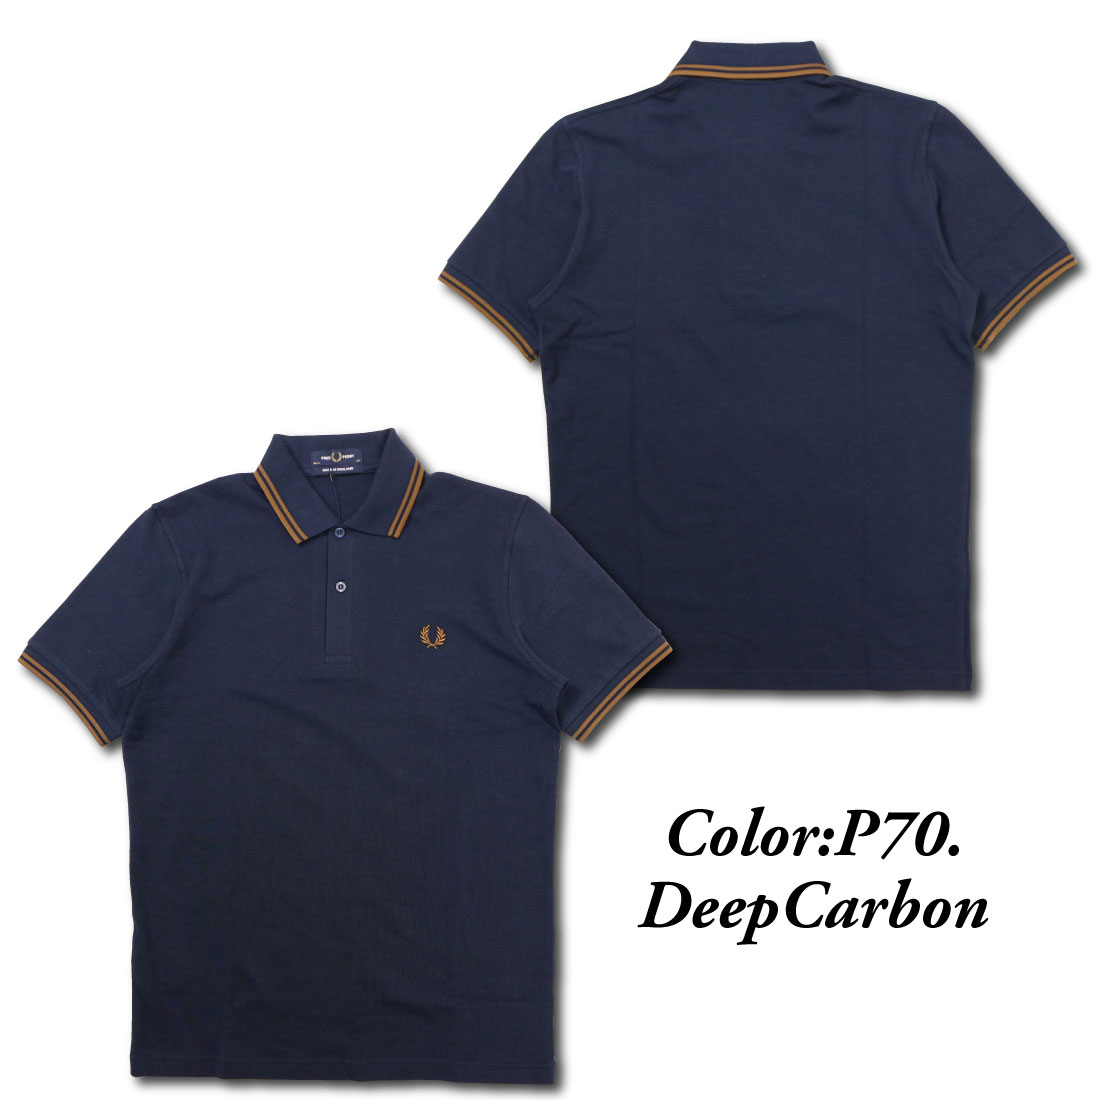 FRED PERRY フレッドペリー 半袖 ポロシャツ The Fred Perry Shirt M12 ティップライン Fred Perry  Shirt 刺繍 メンズ 157 303 D56 P70 正規販売店